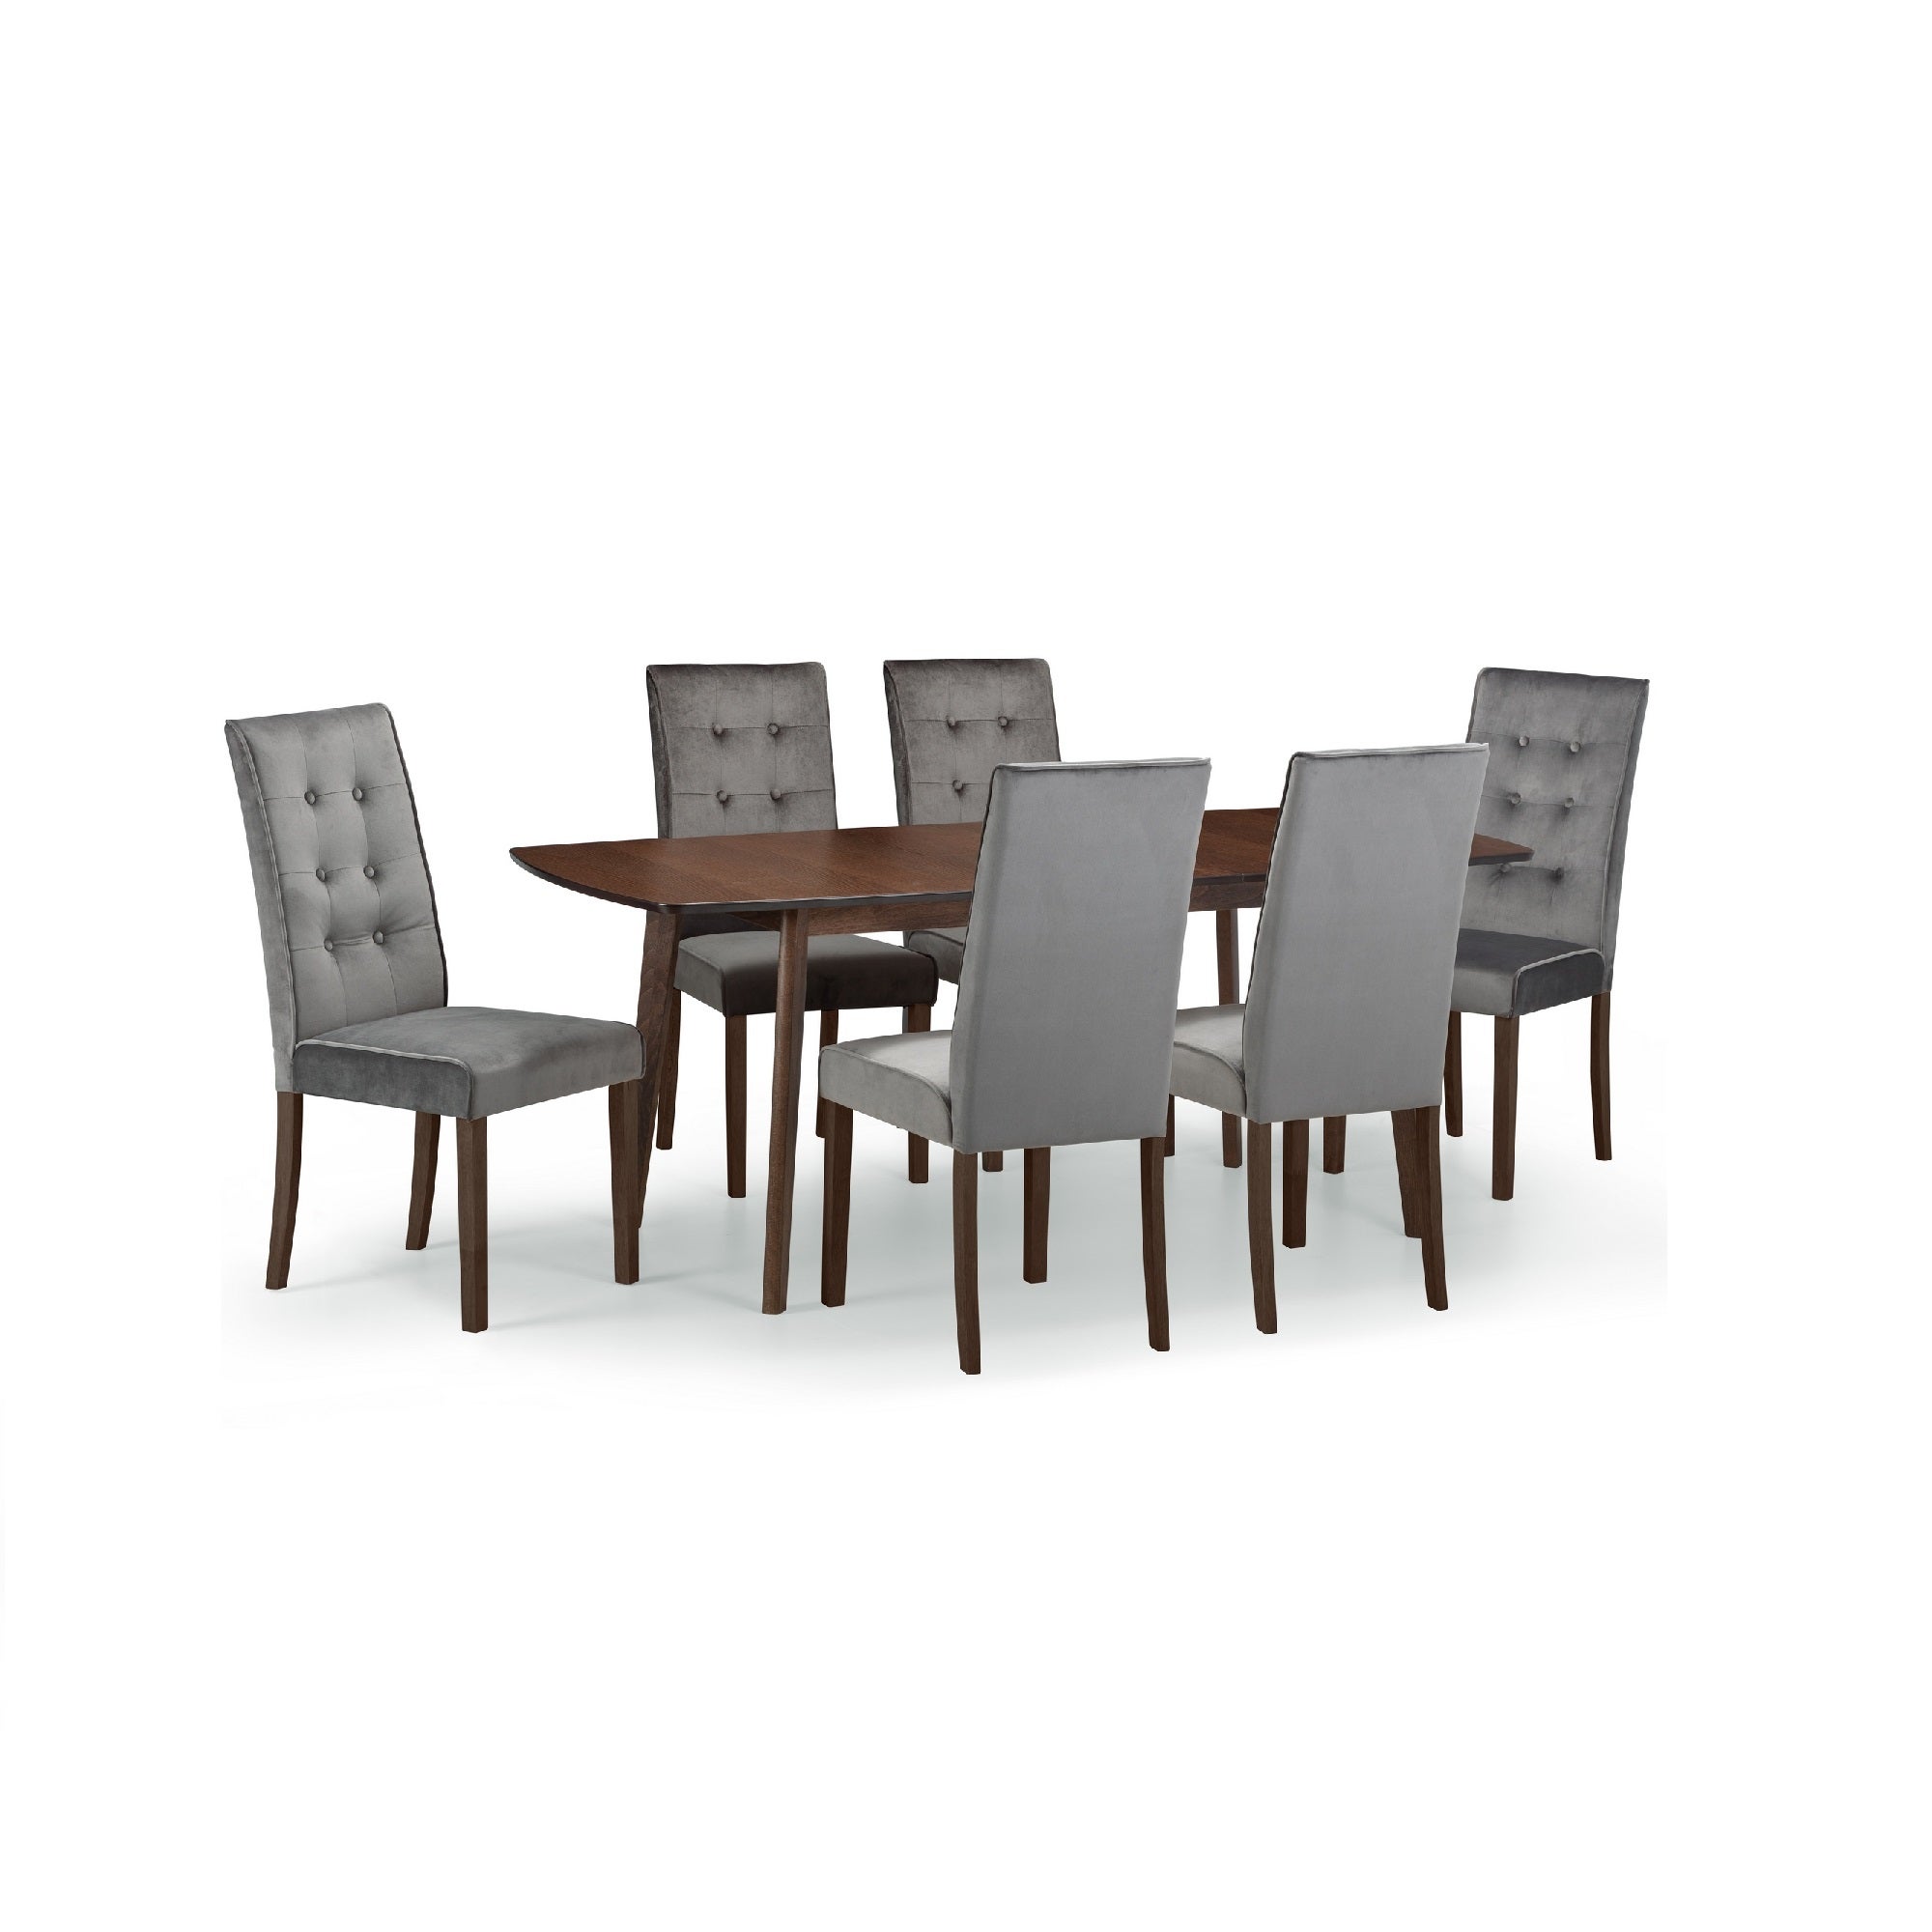 Kensington Rectangular Extendable Dining Table With 6 Madrid Chairs Beech Wood Brown